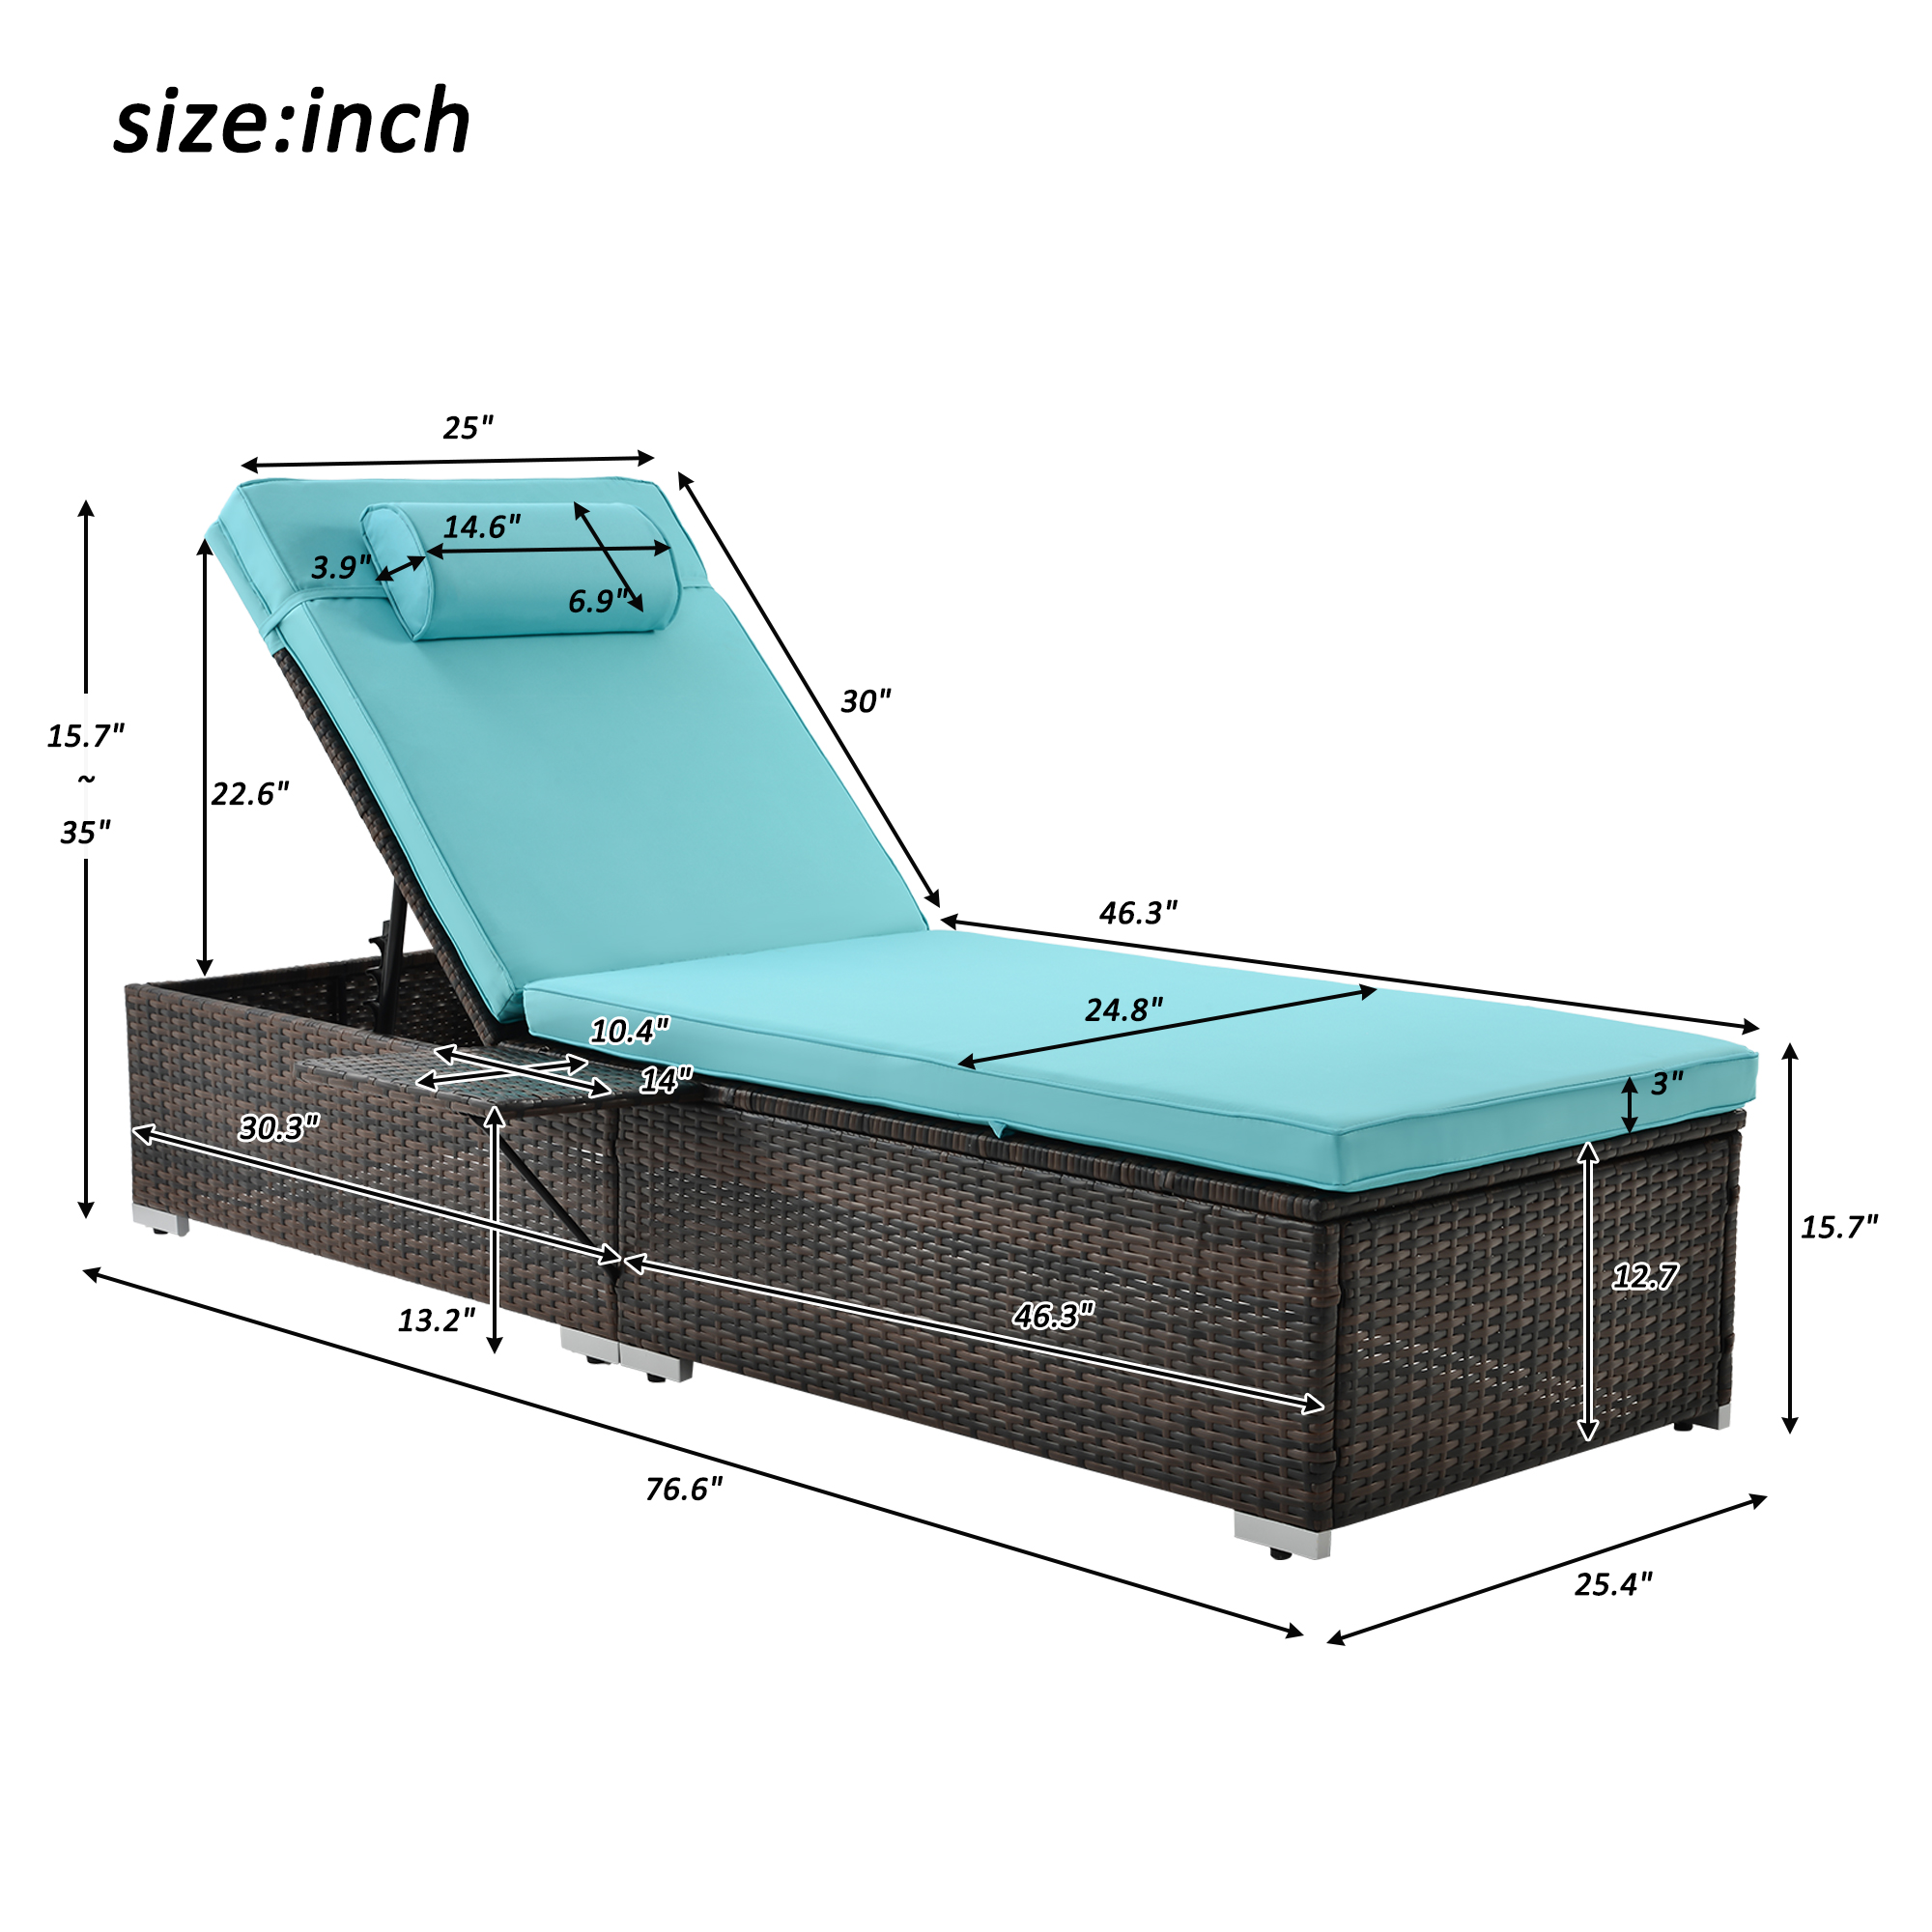 2 Pieces Patio Chaise Lounge Chair Set, PE Rattan Chaise Lounge with Side Table, Sun Chaise Lounge Furniture, Pool Furniture Sunbed with Cushion, Tanning Lounge Chair with 5 Adjustable Positions, B382 - image 4 of 8